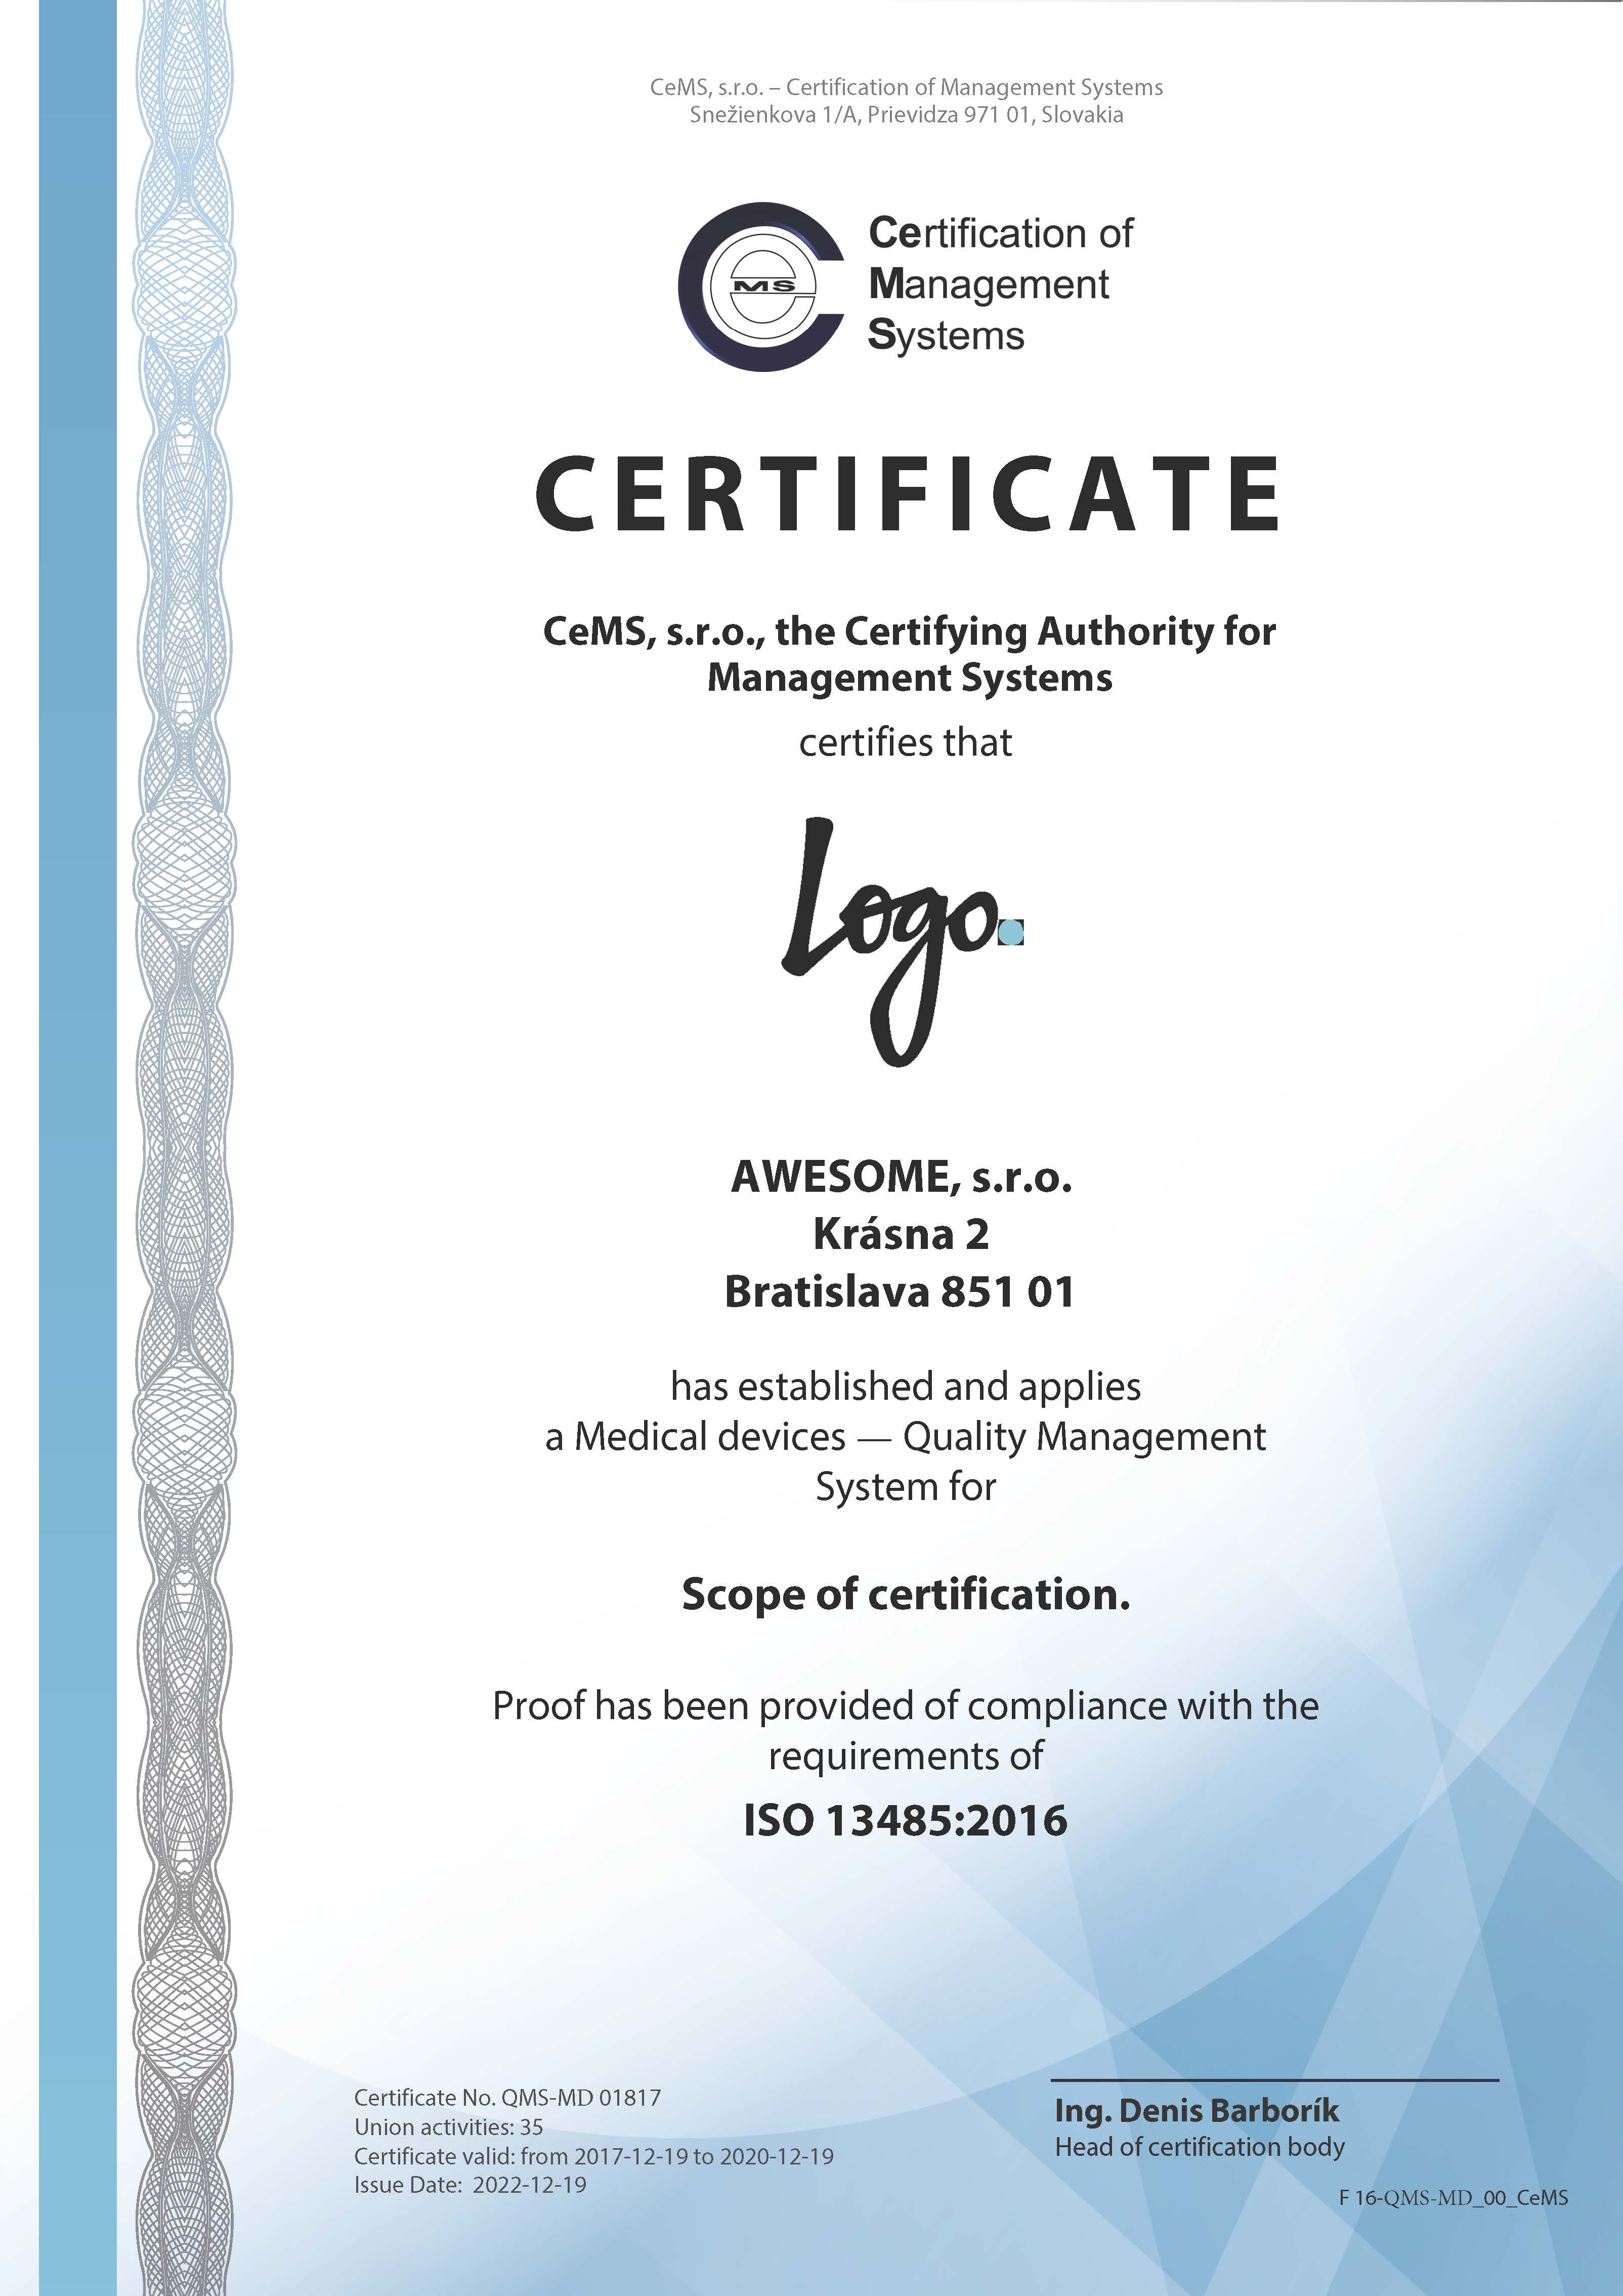 Certificate ISO 13485 by CeMS